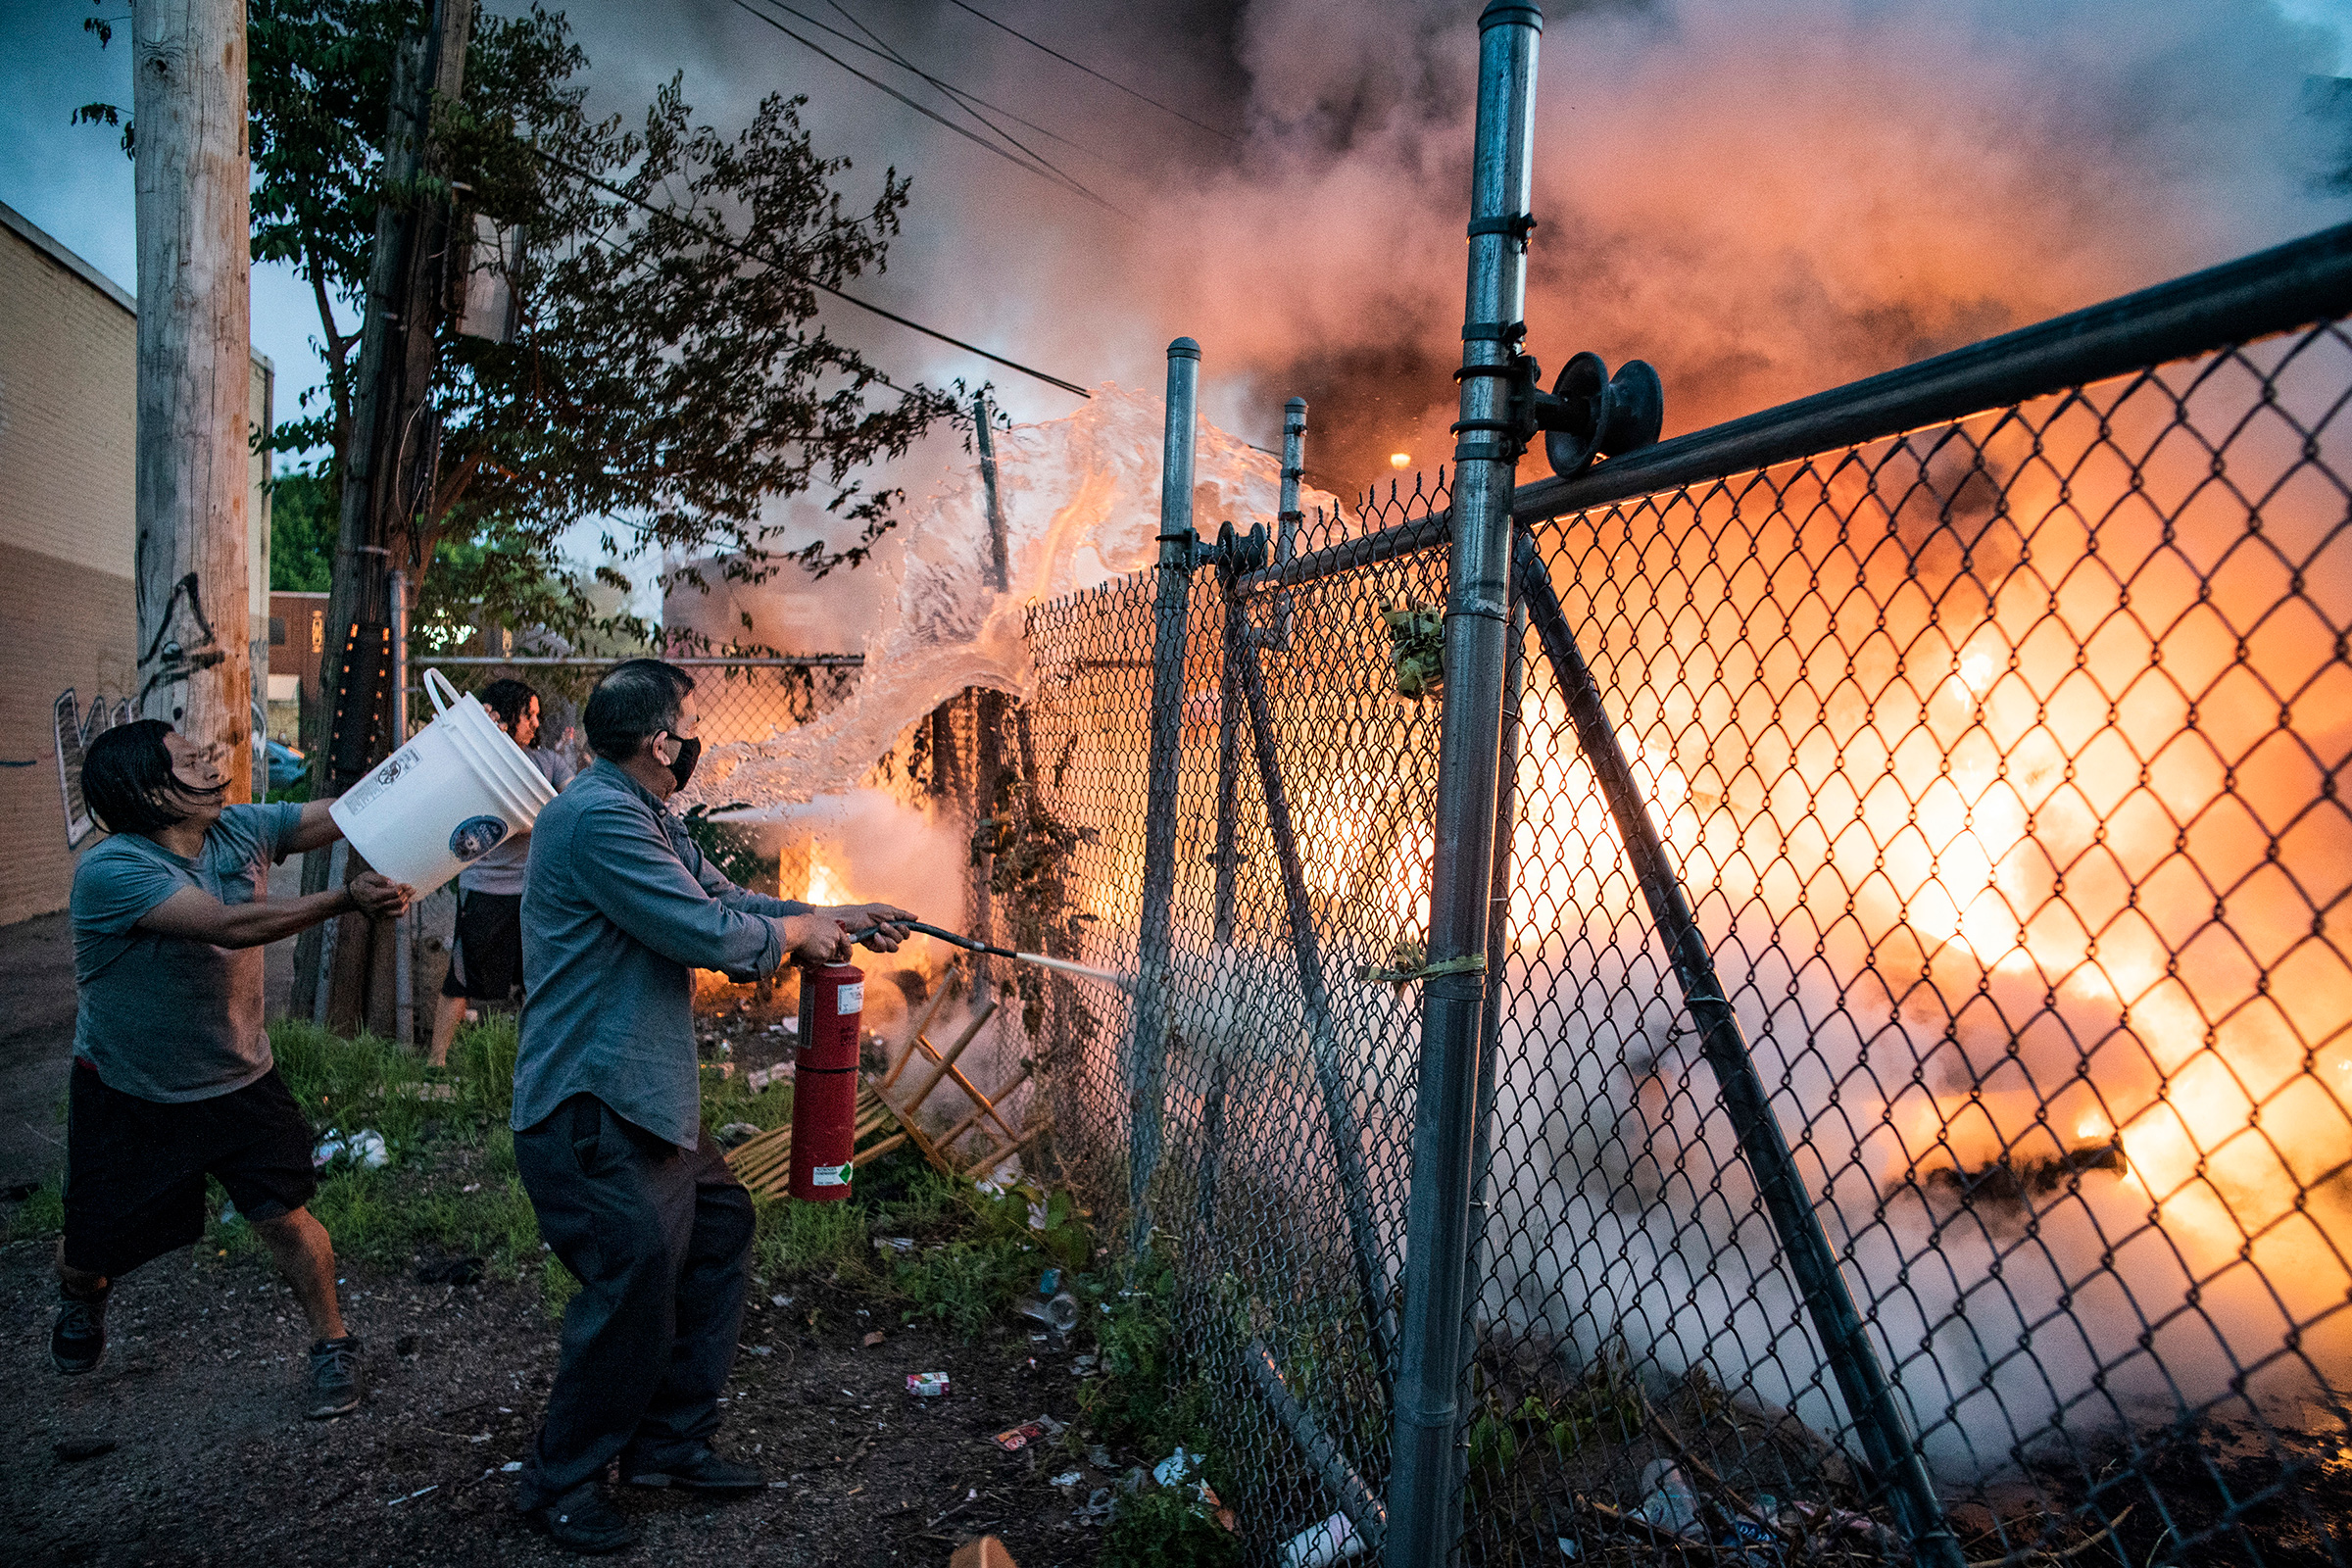 Residents put out a car fire near Lake Street in Minneapolis, Minn., on May 29, 2020. As peaceful demonstrations turned increasingly violent by some protestors, Mayor Jacob Frey ordered a citywide curfew at 8 p.m. local time. (Richard Tsong-Taatarii—Star Tribune/AP)